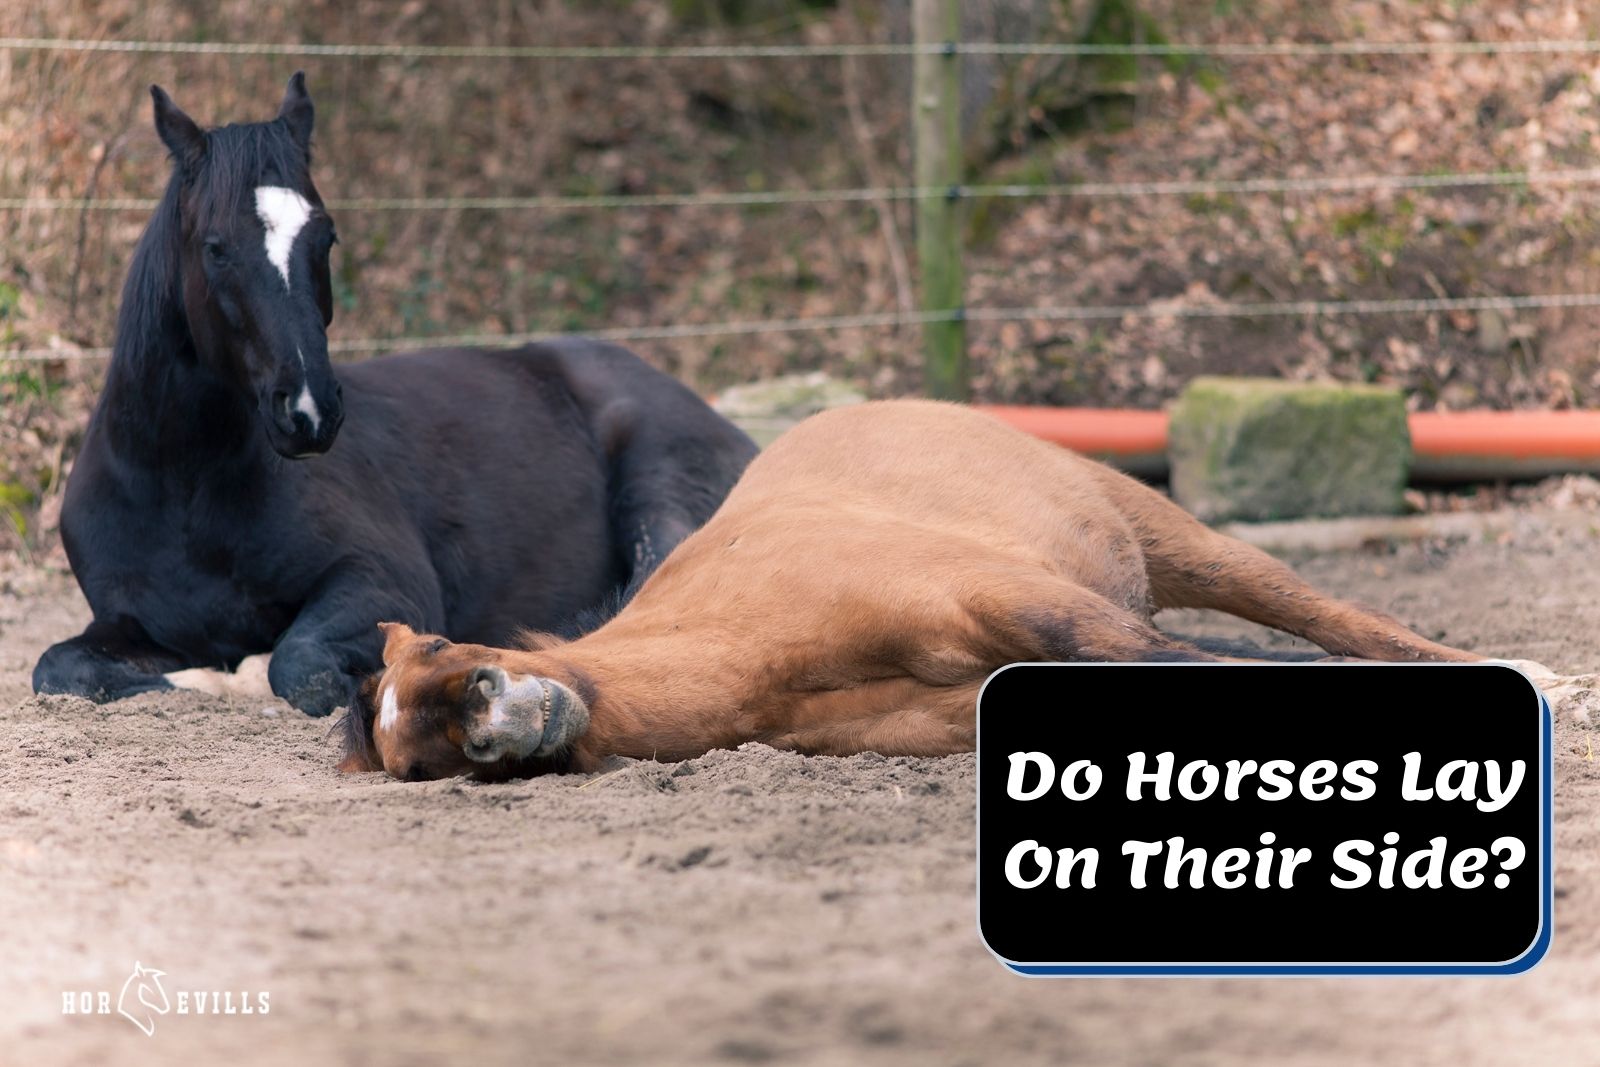 Is It Normal For a Horse to Lay Down?